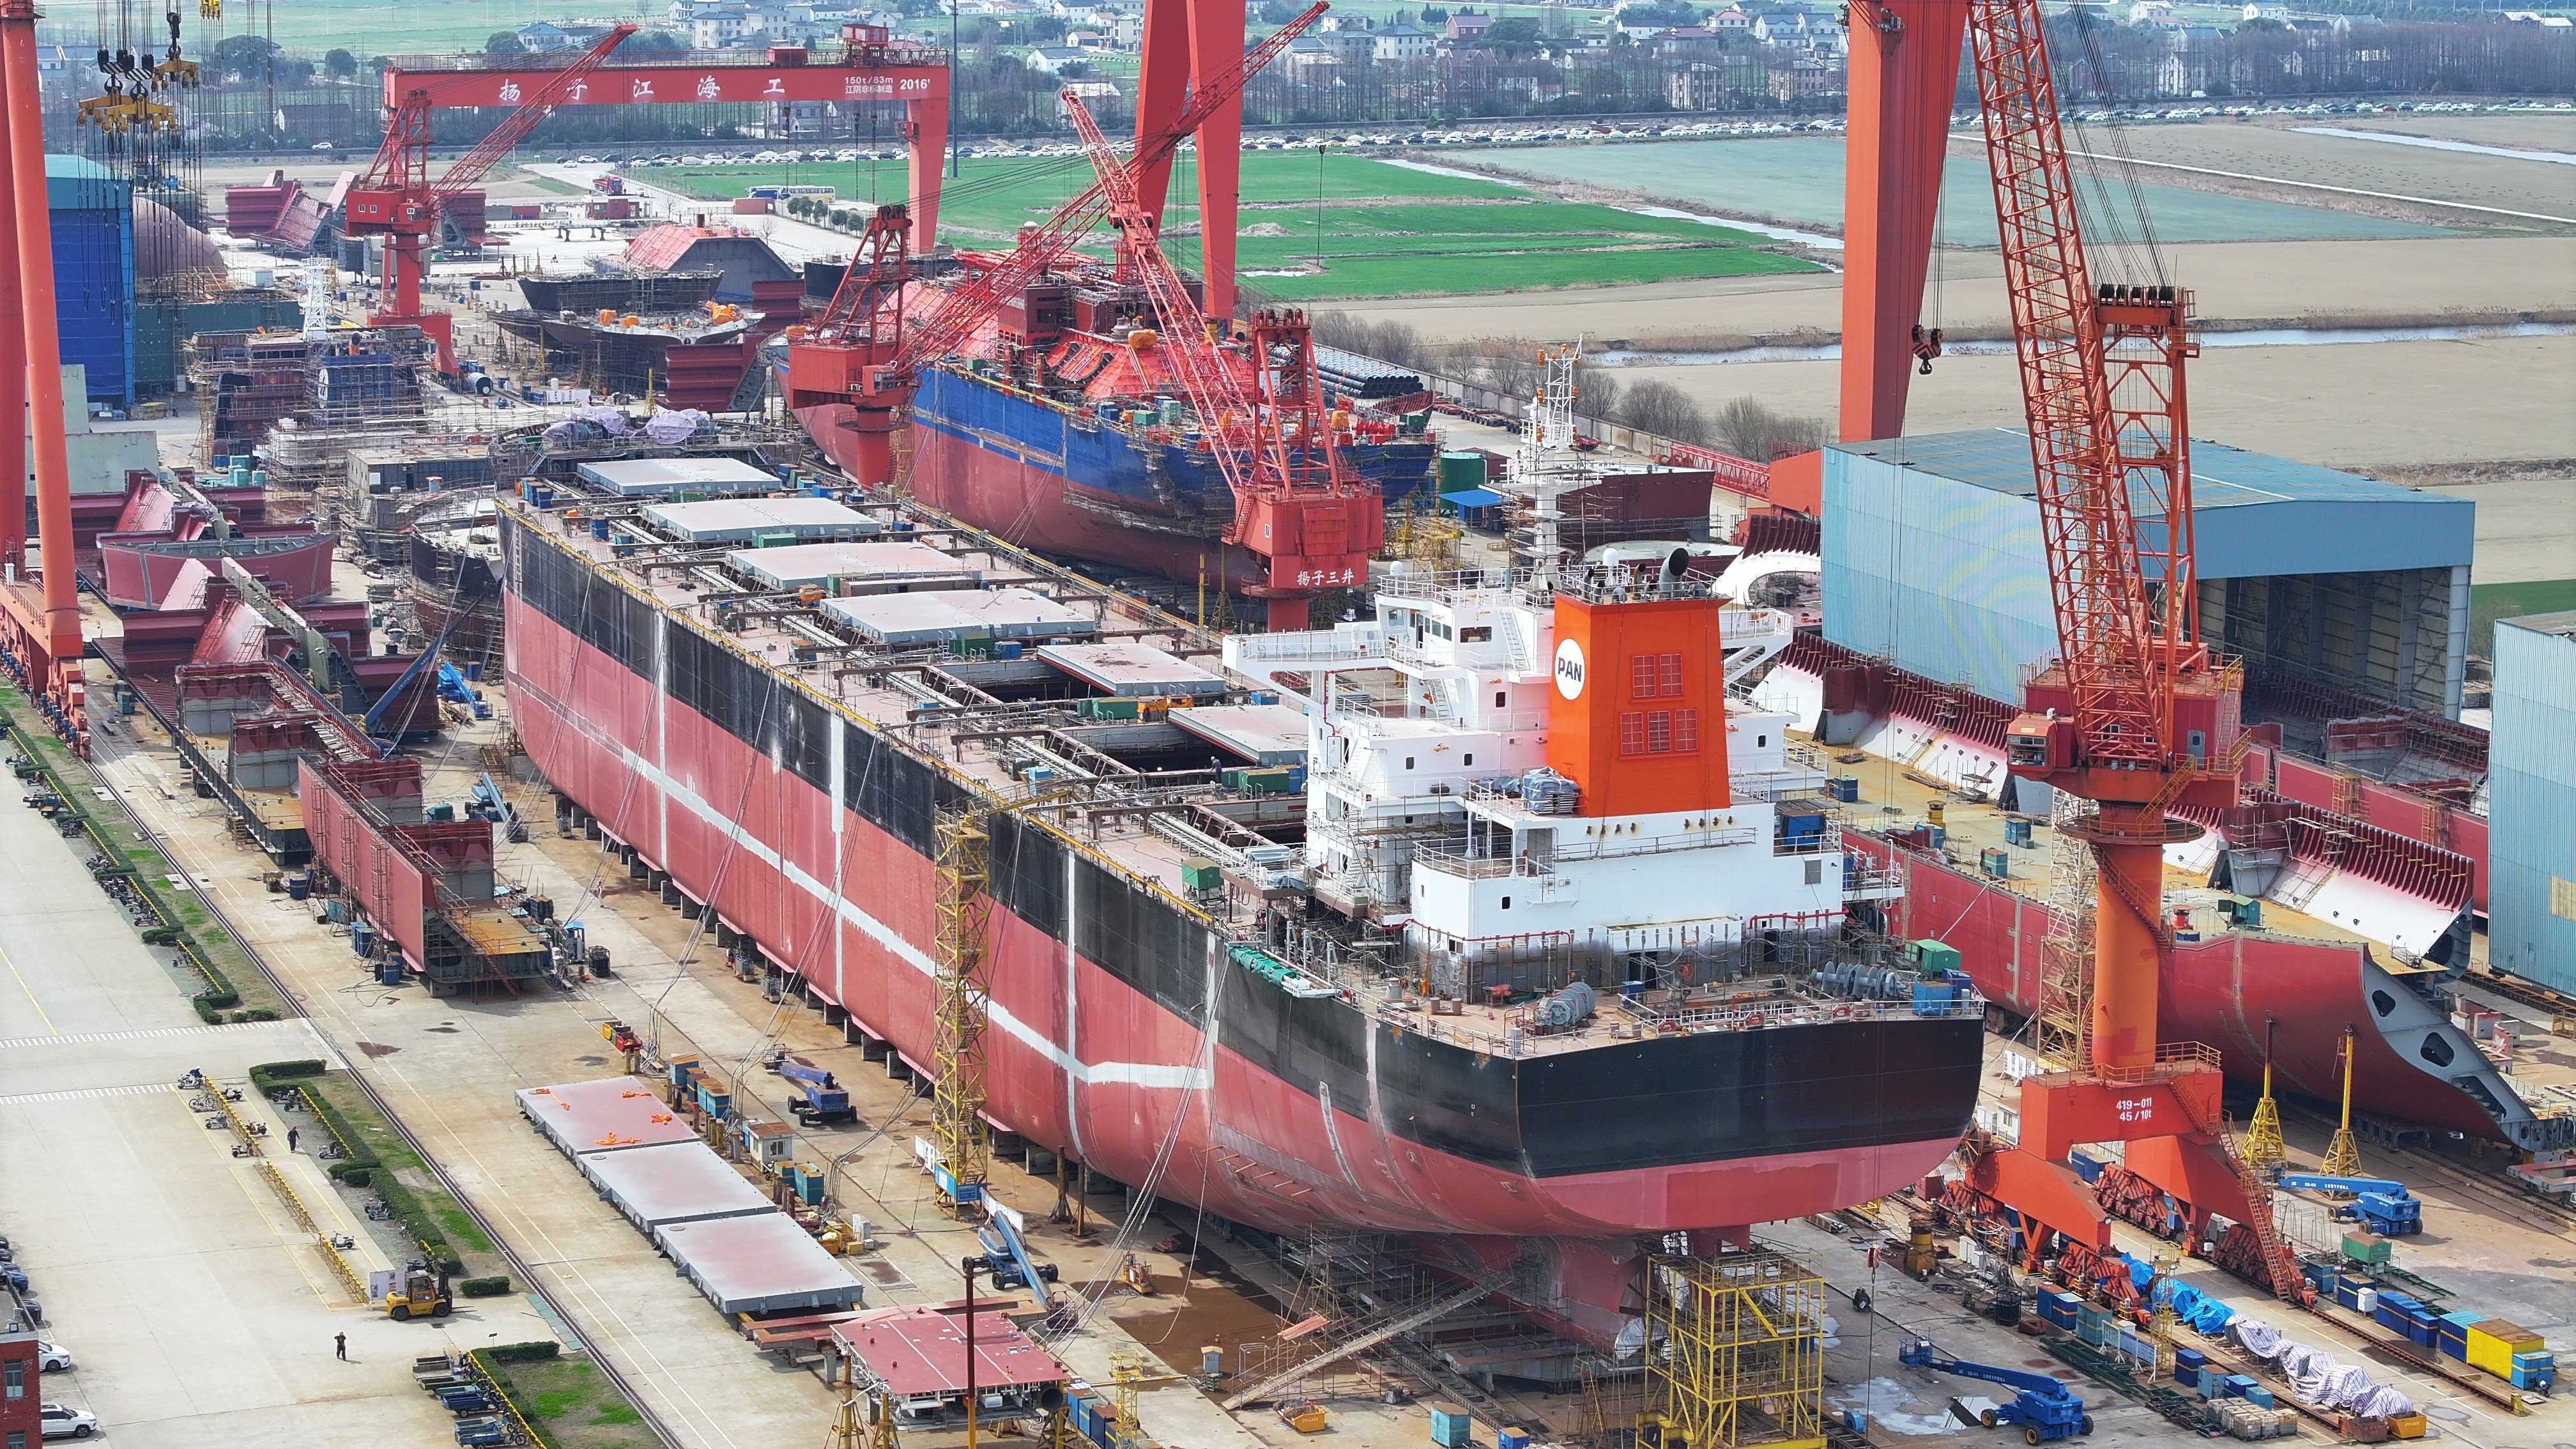 Several shipping vessels are seen under construction in China’s Jiangsu province on March 1. Photo: Getty Images